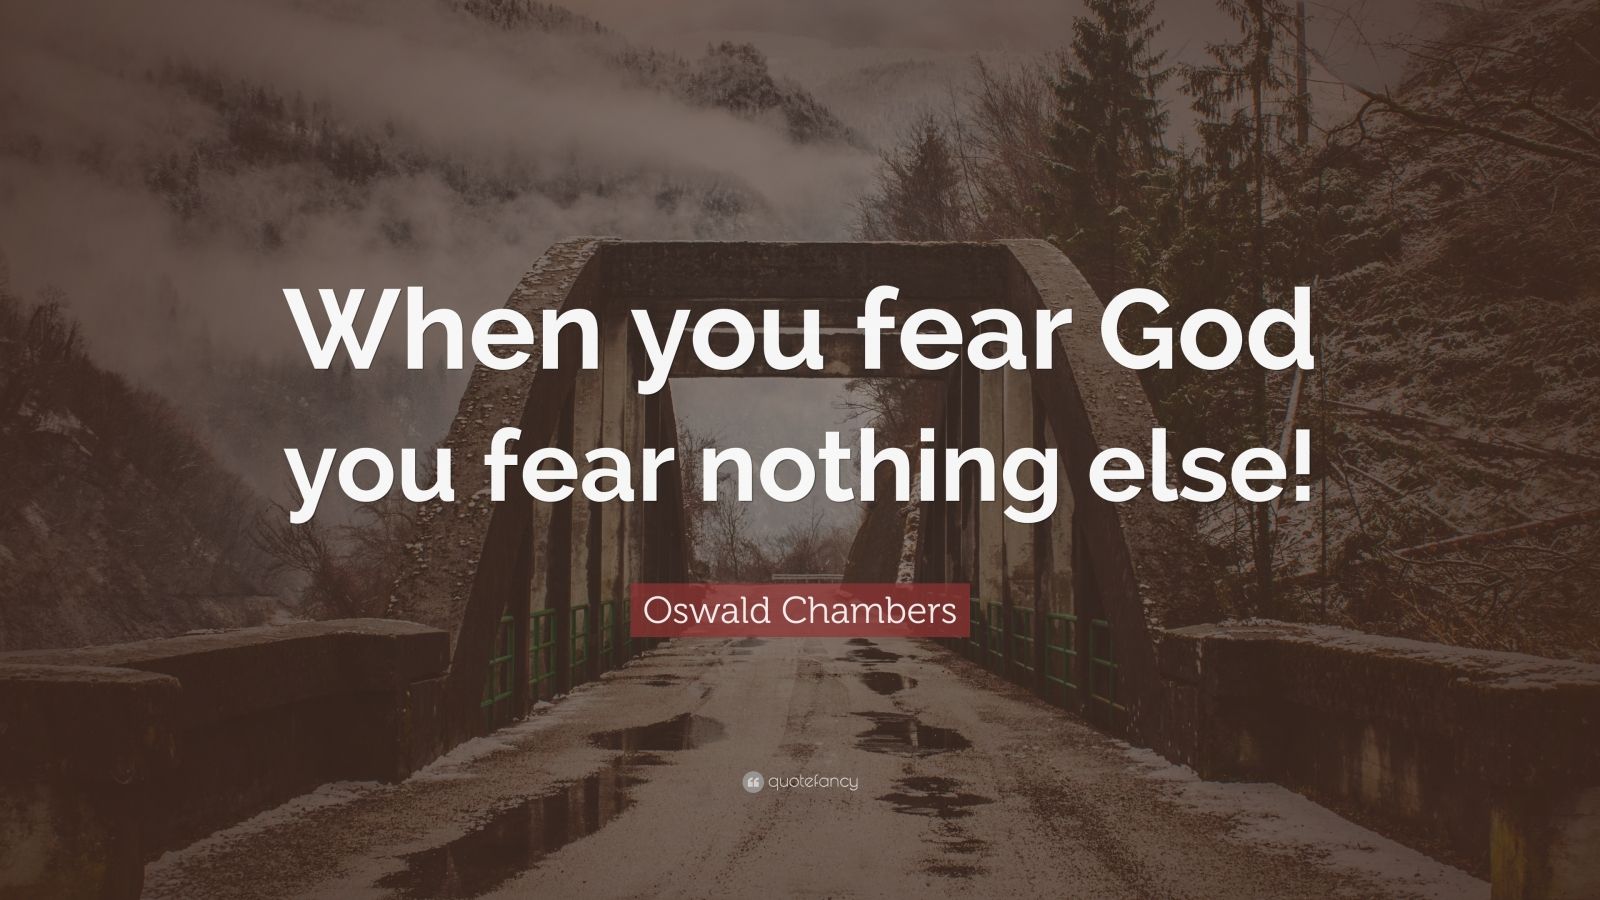 Oswald Chambers Quote: “When you fear God you fear nothing else!” (12